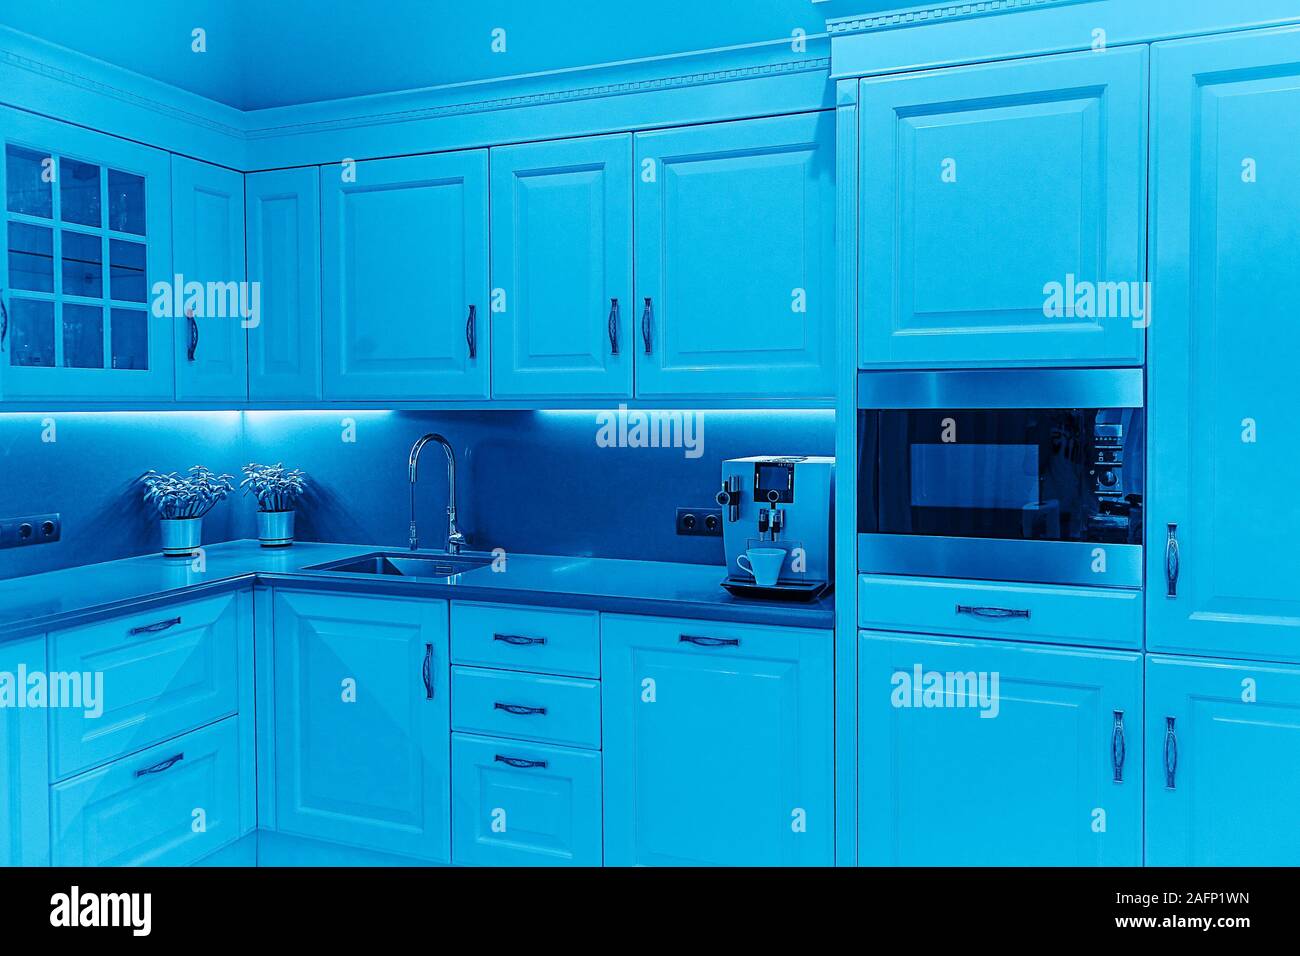 Luxury modern beige and white kitchen interior. Classic Blue color 2020 concept. Stock Photo